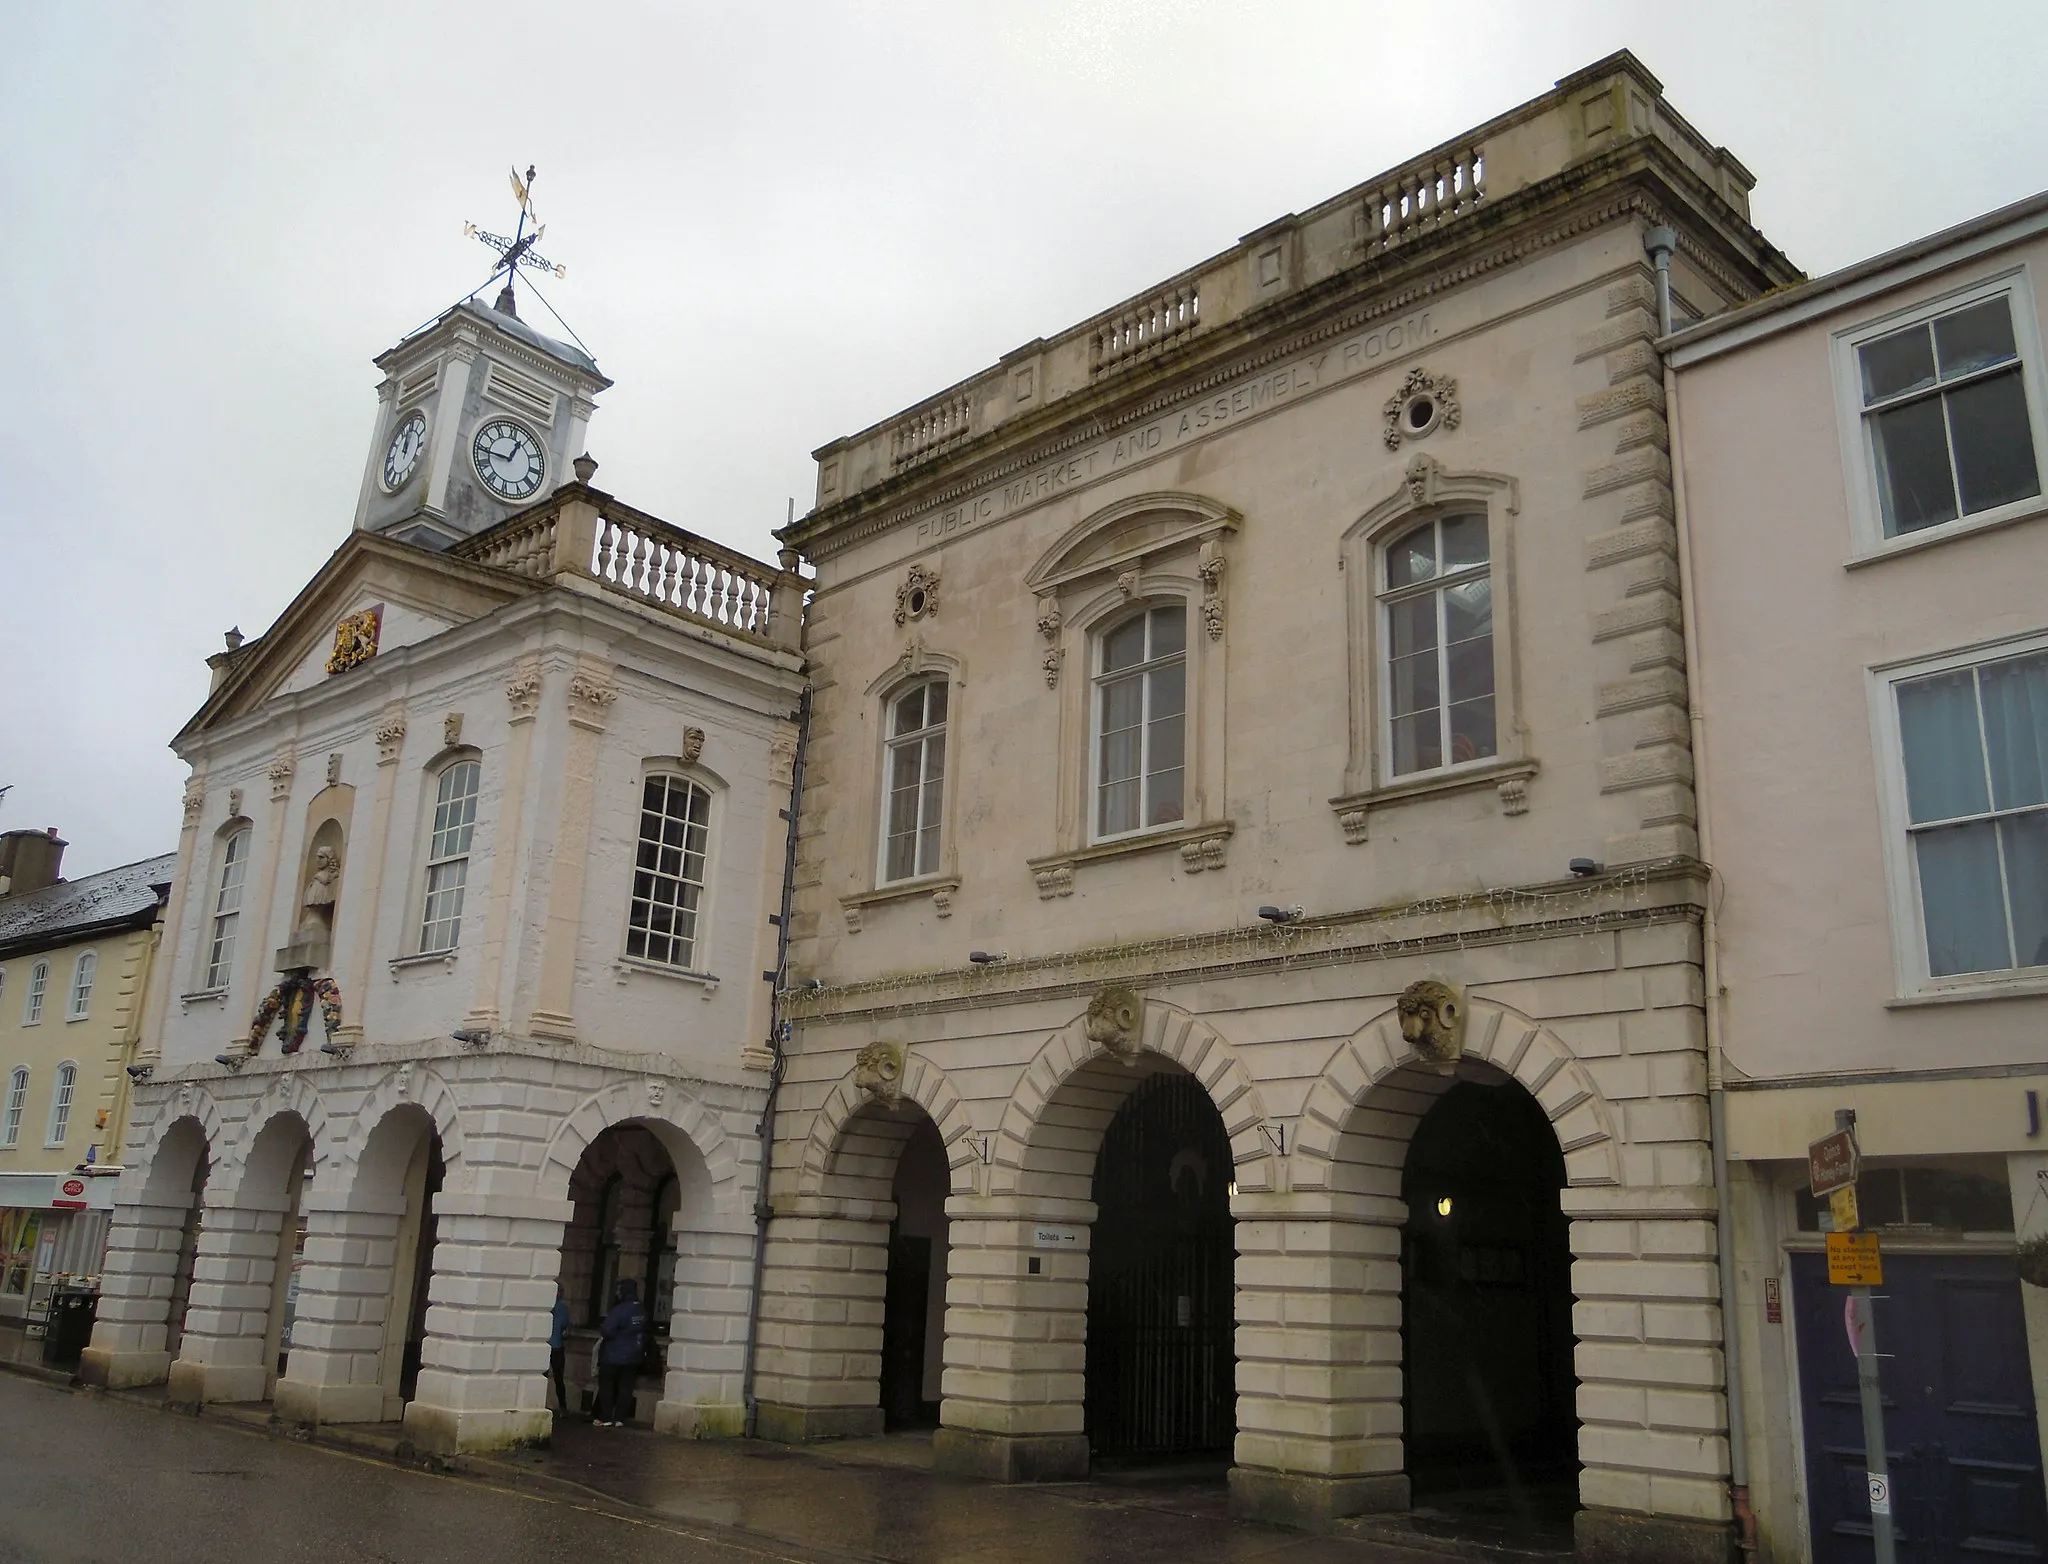 Photo showing: The Guildhall in South Molton was constructed between 1739 to 1741. Behind it is the town's Pannier Market